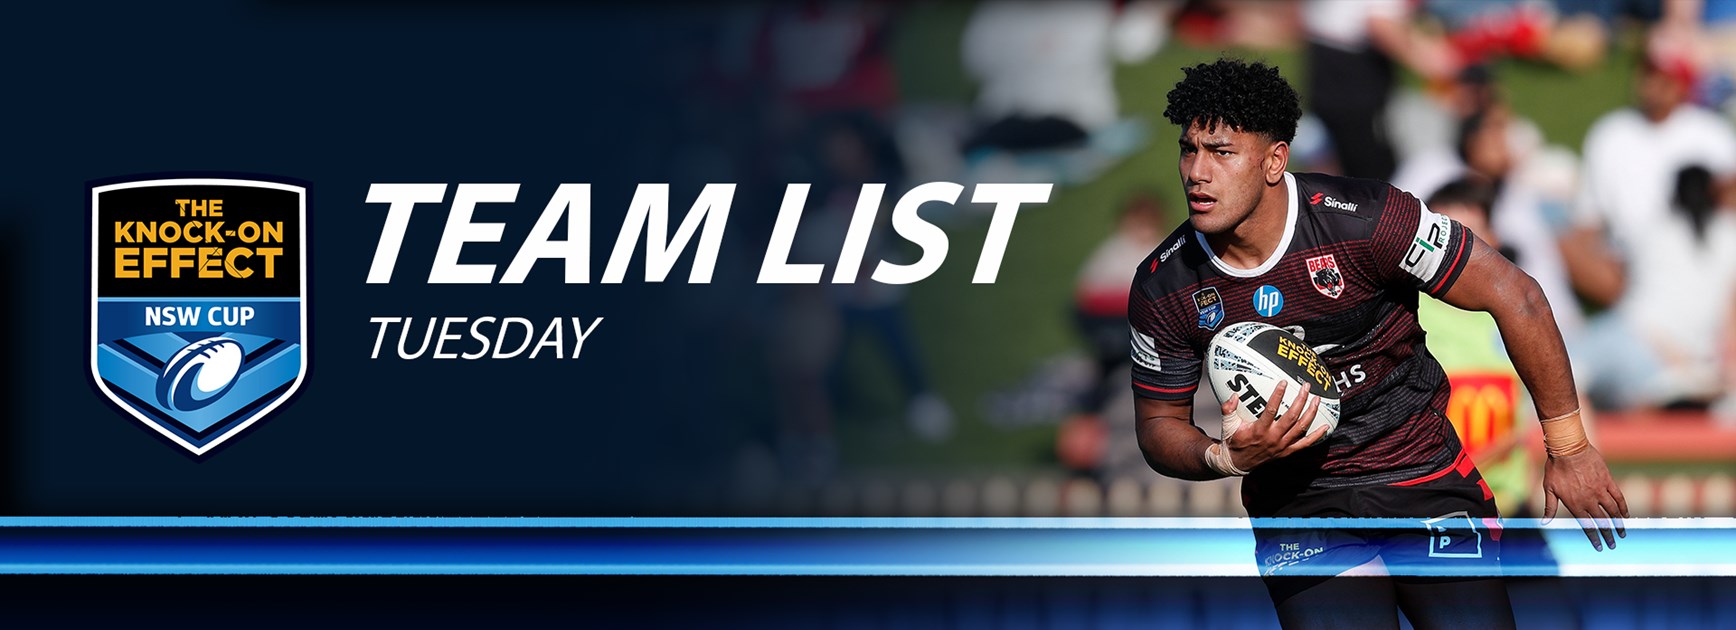 Team List Tuesday | The Knock-On Effect NSW Cup Finals Week One